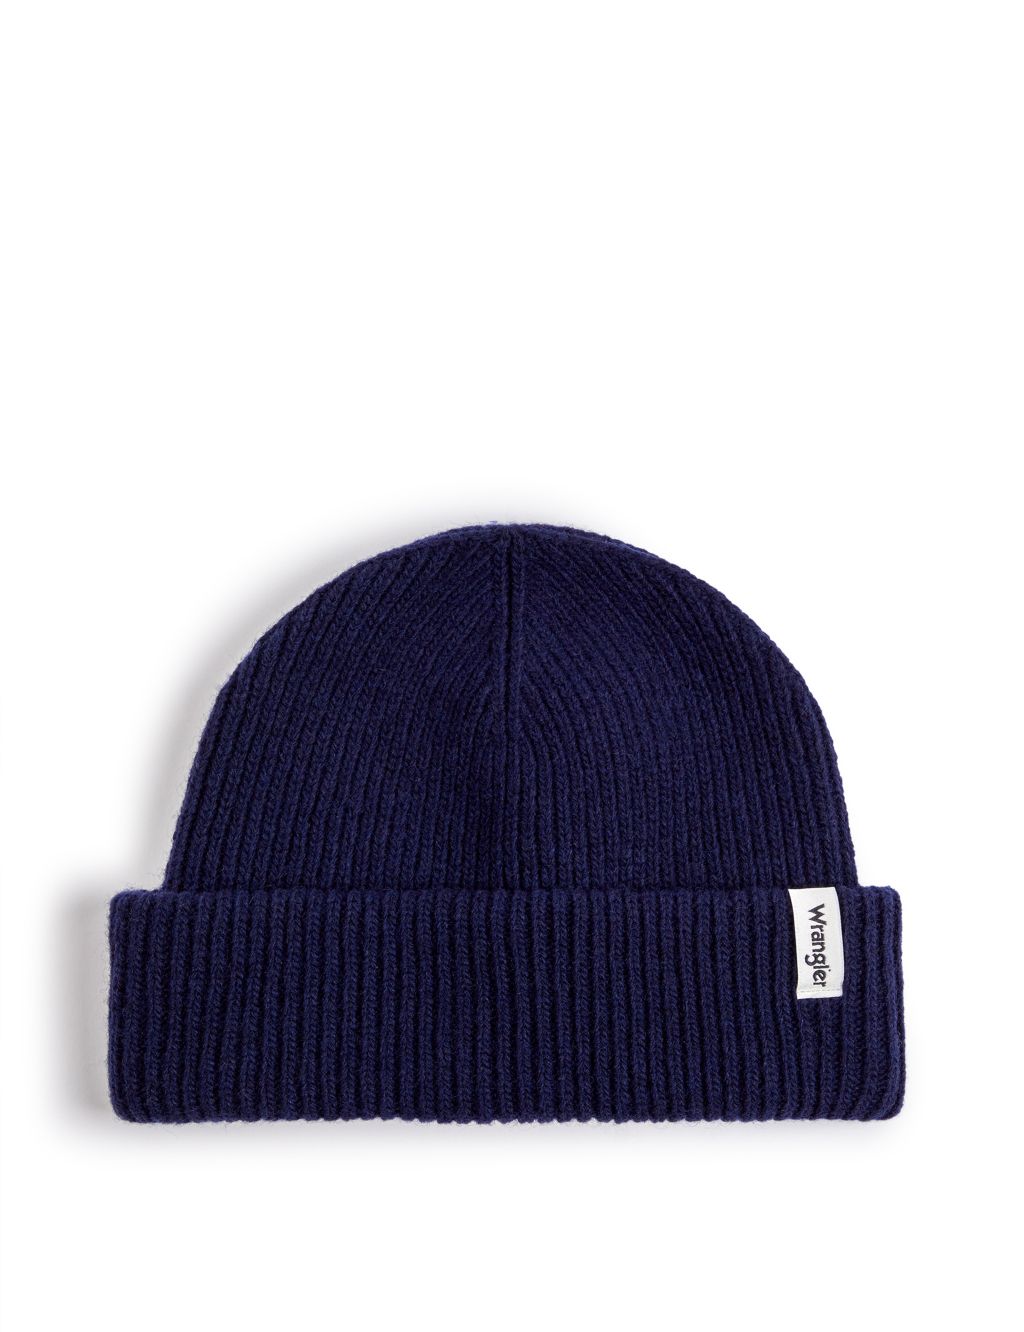 Wool Rich Knitted Beanie Hat image 2